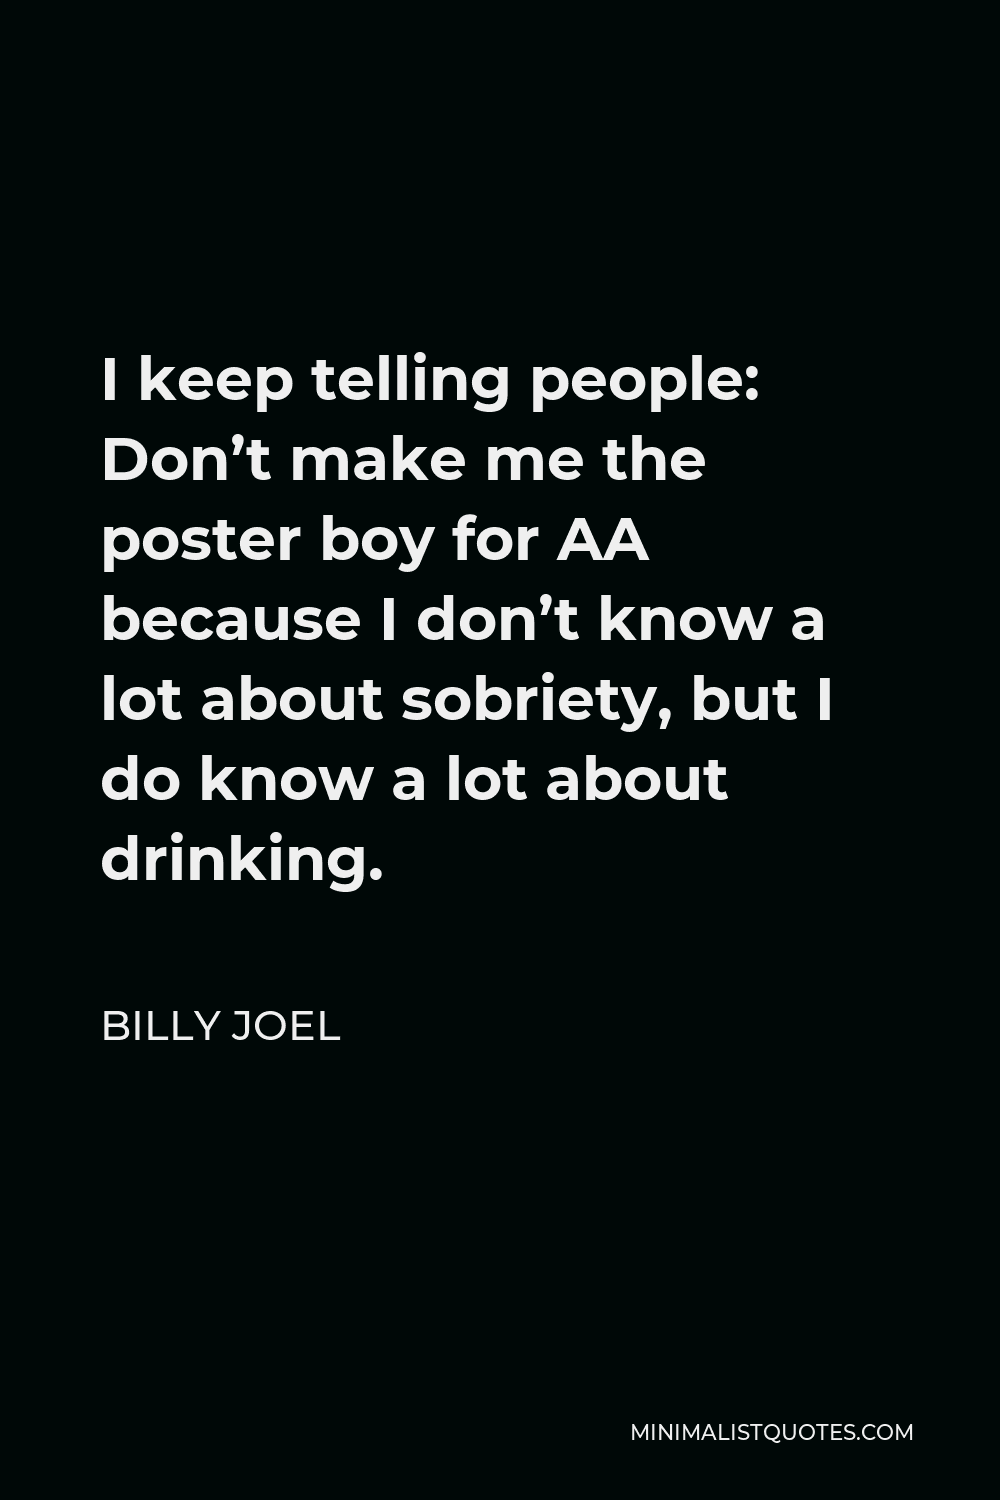 Billy Joel Quote - I keep telling people: Don’t make me the poster boy for AA because I don’t know a lot about sobriety, but I do know a lot about drinking.